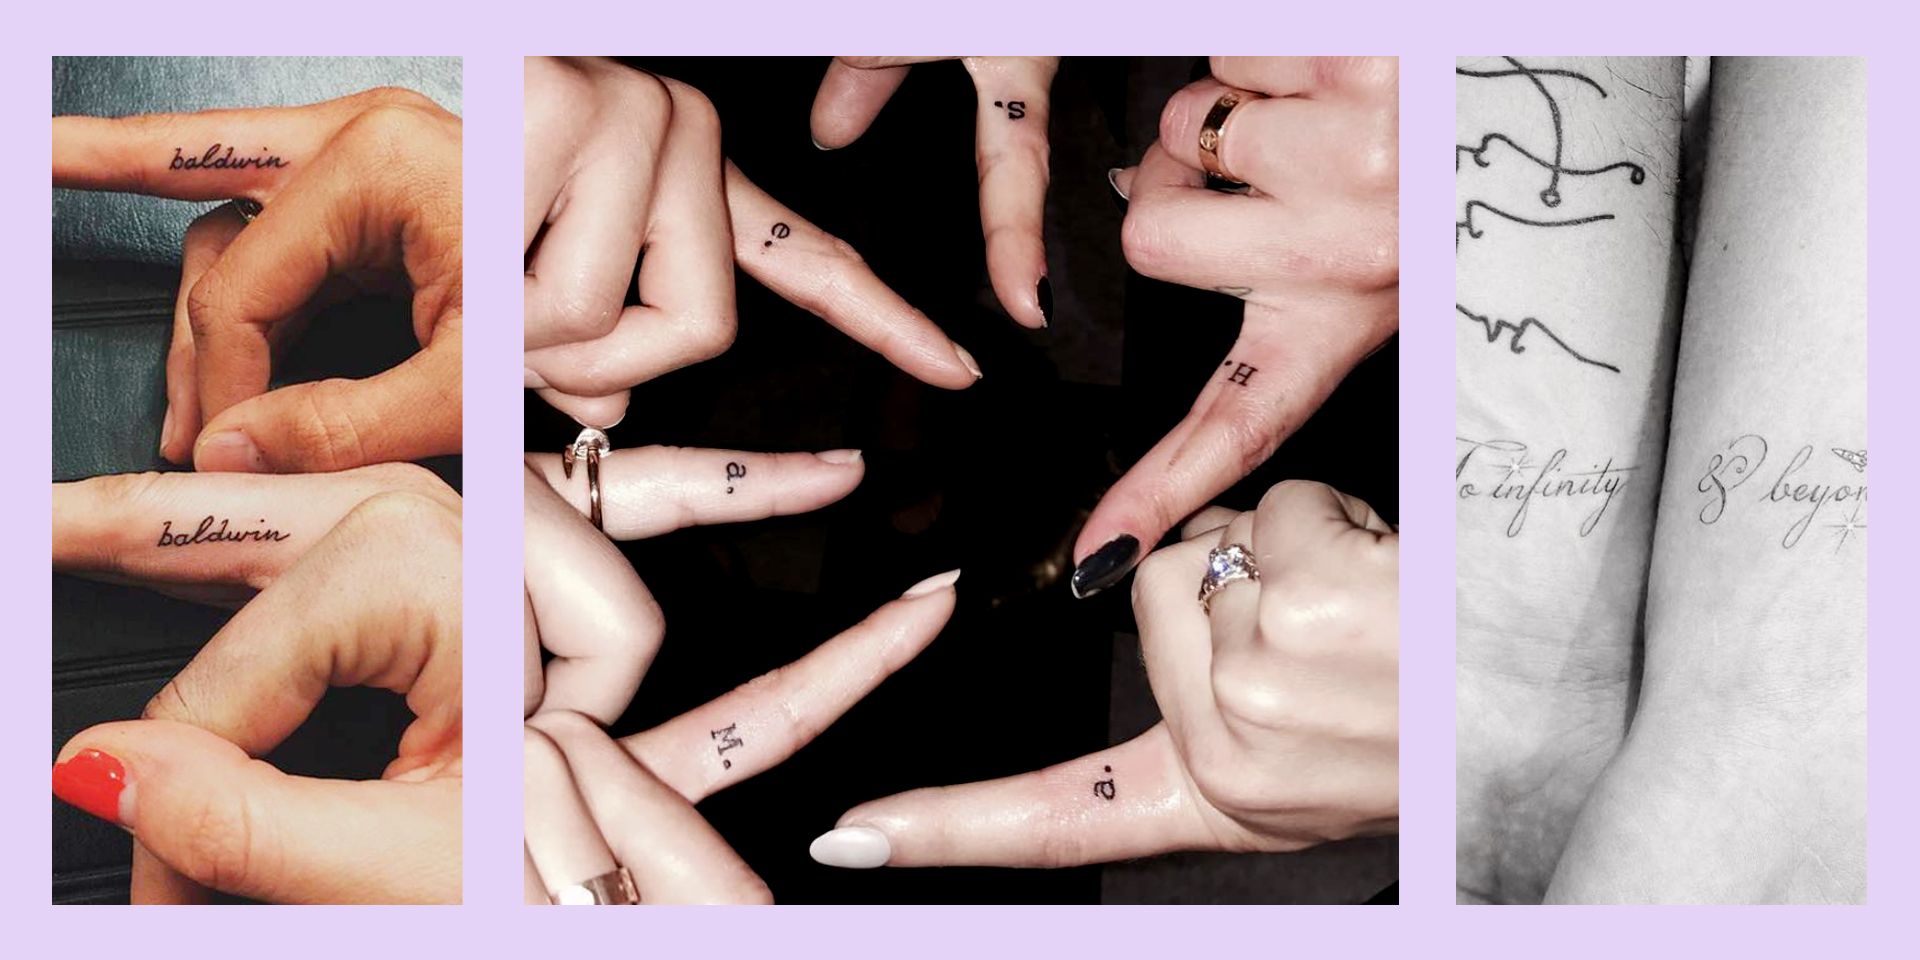 Tattoo For You Too: Celebrities With Matching Tattoos (Awww